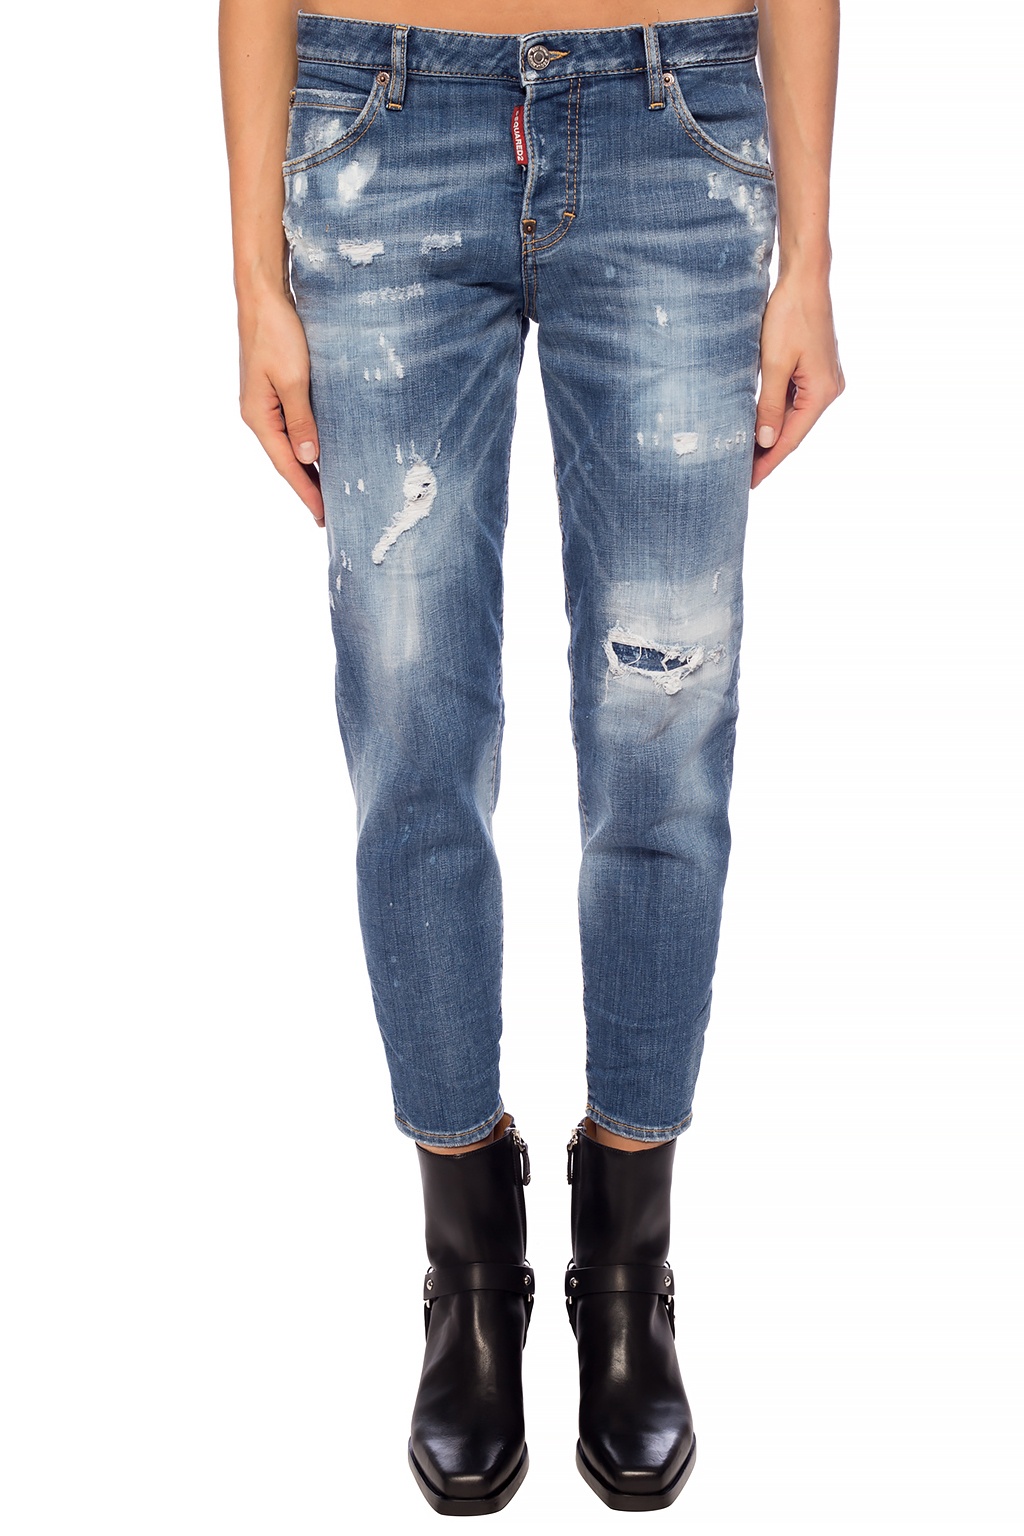 Dsquared2 'Hockney Jean' distressed jeans | Women's Clothing | Vitkac